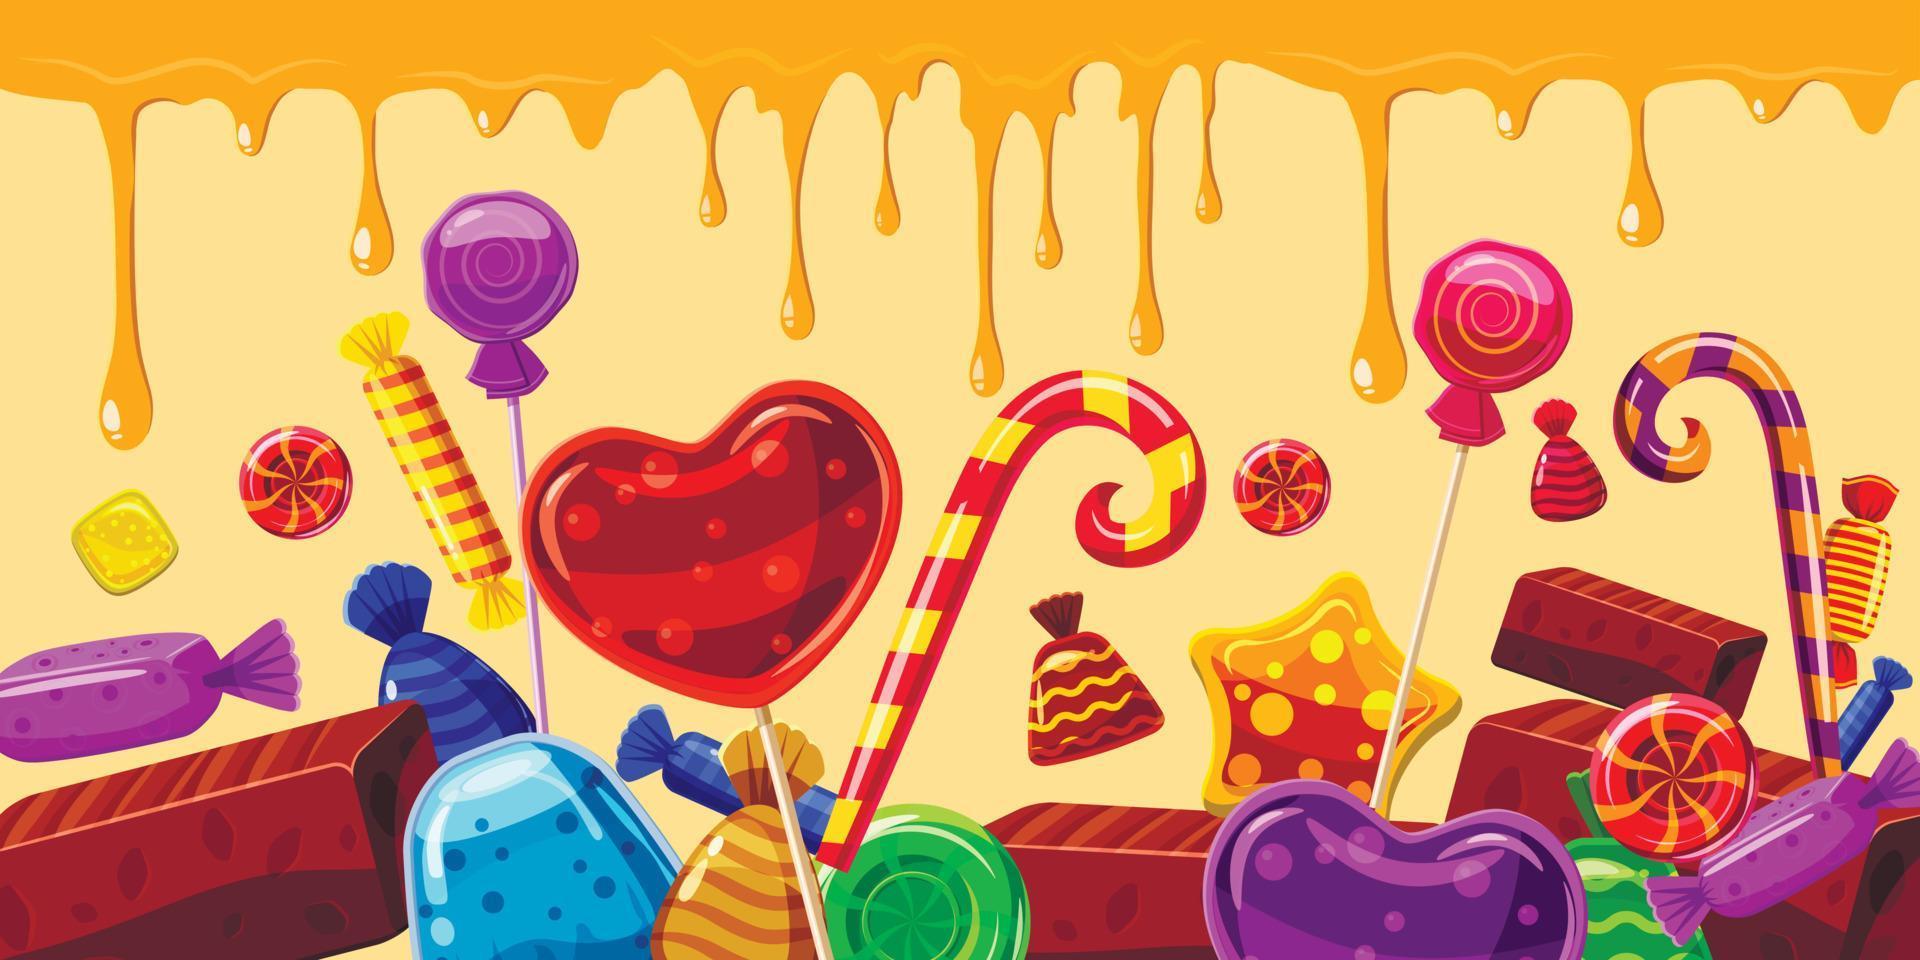 Sweets cakes banner horizontal line, cartoon style vector